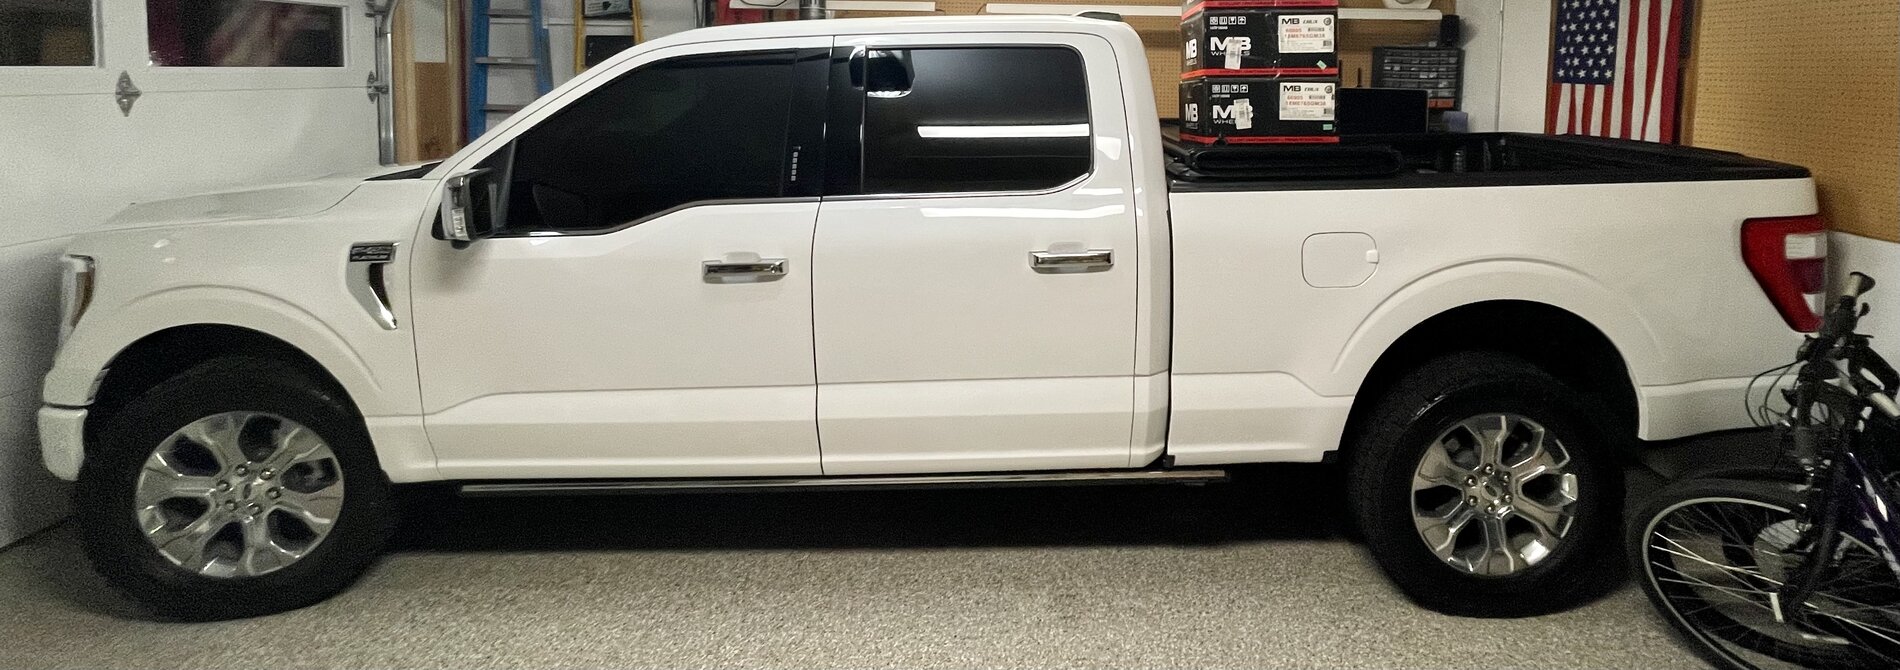 Ford F-150 Does your truck fit in your garage? 56E5CF04-8B4C-457D-B9F3-BA664DEC6B63